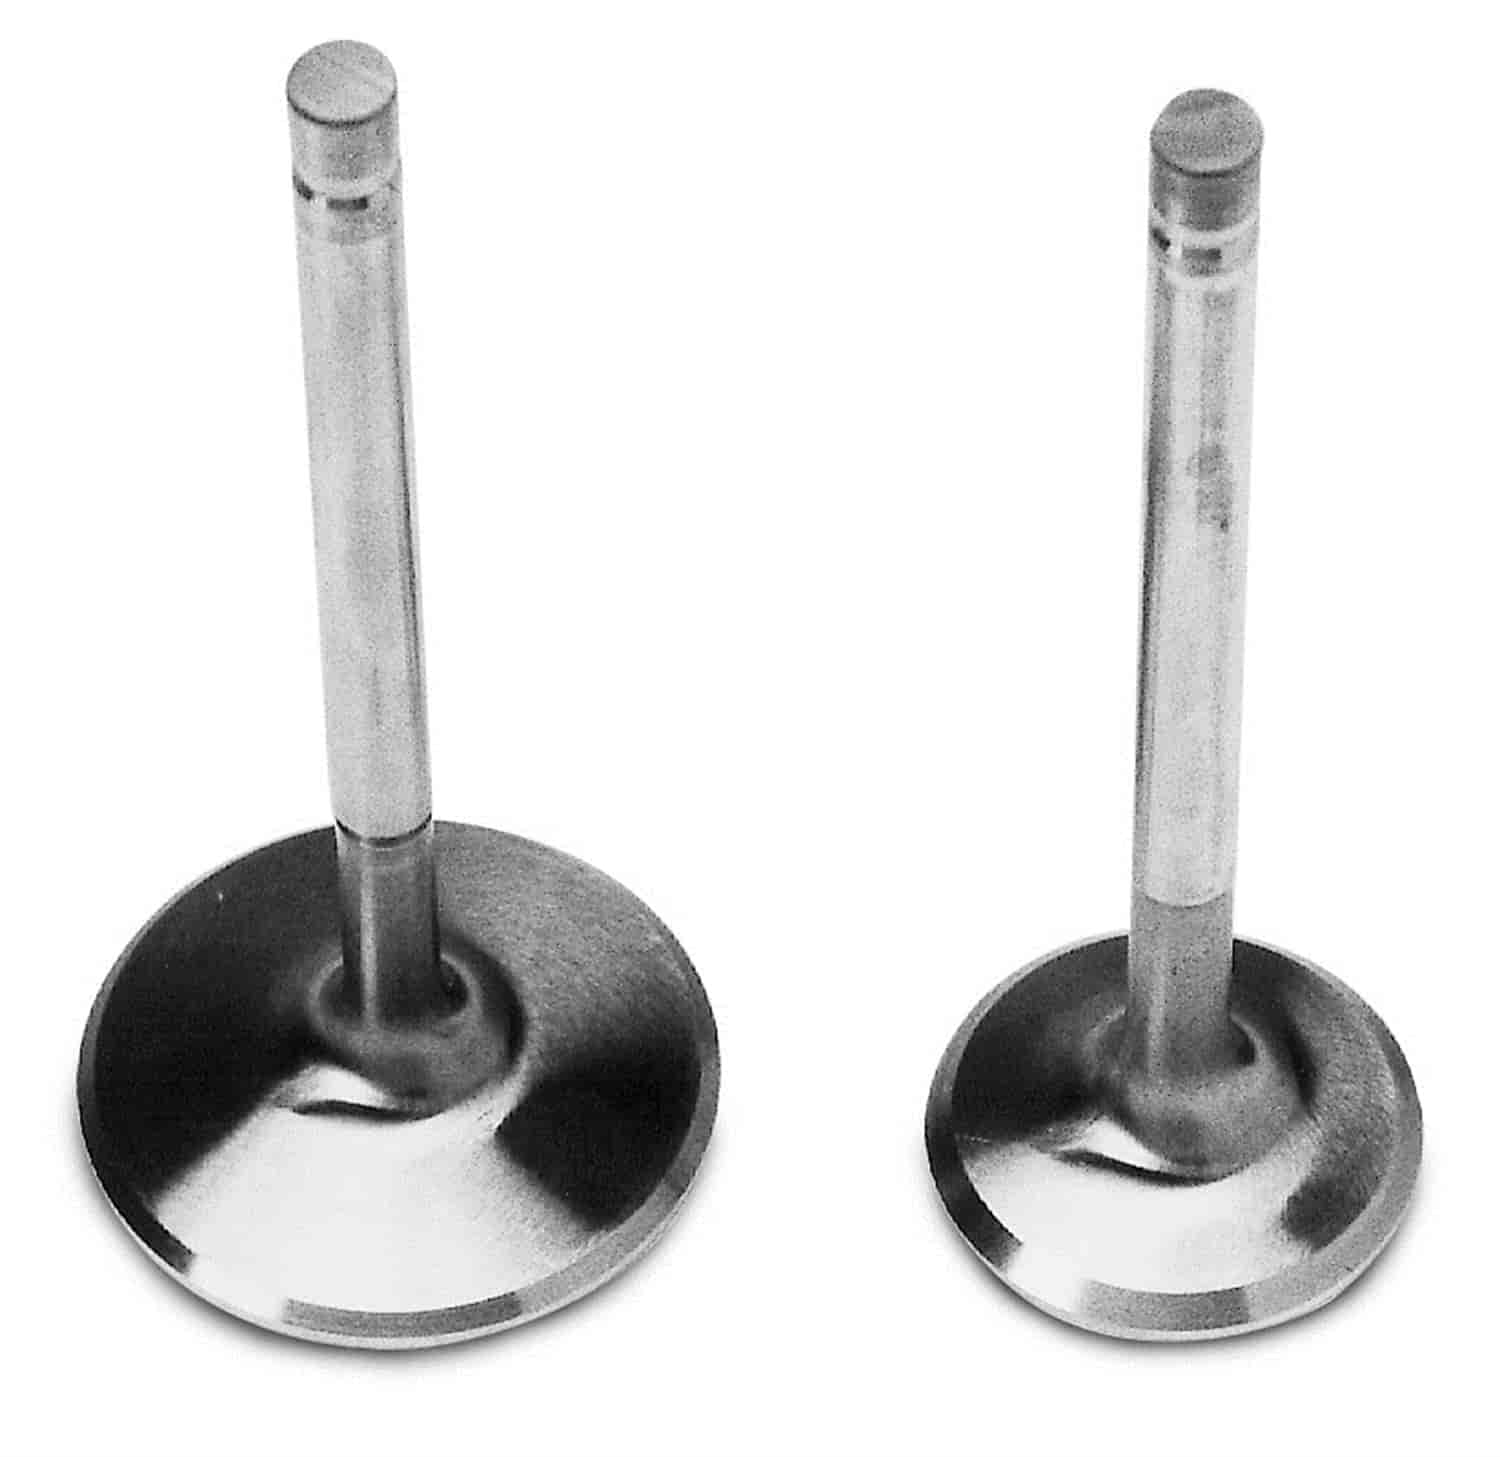 Single Exhaust Valve 1.76" for Big Block Ford Performer RPM Heads #350-60669, & 350-60689